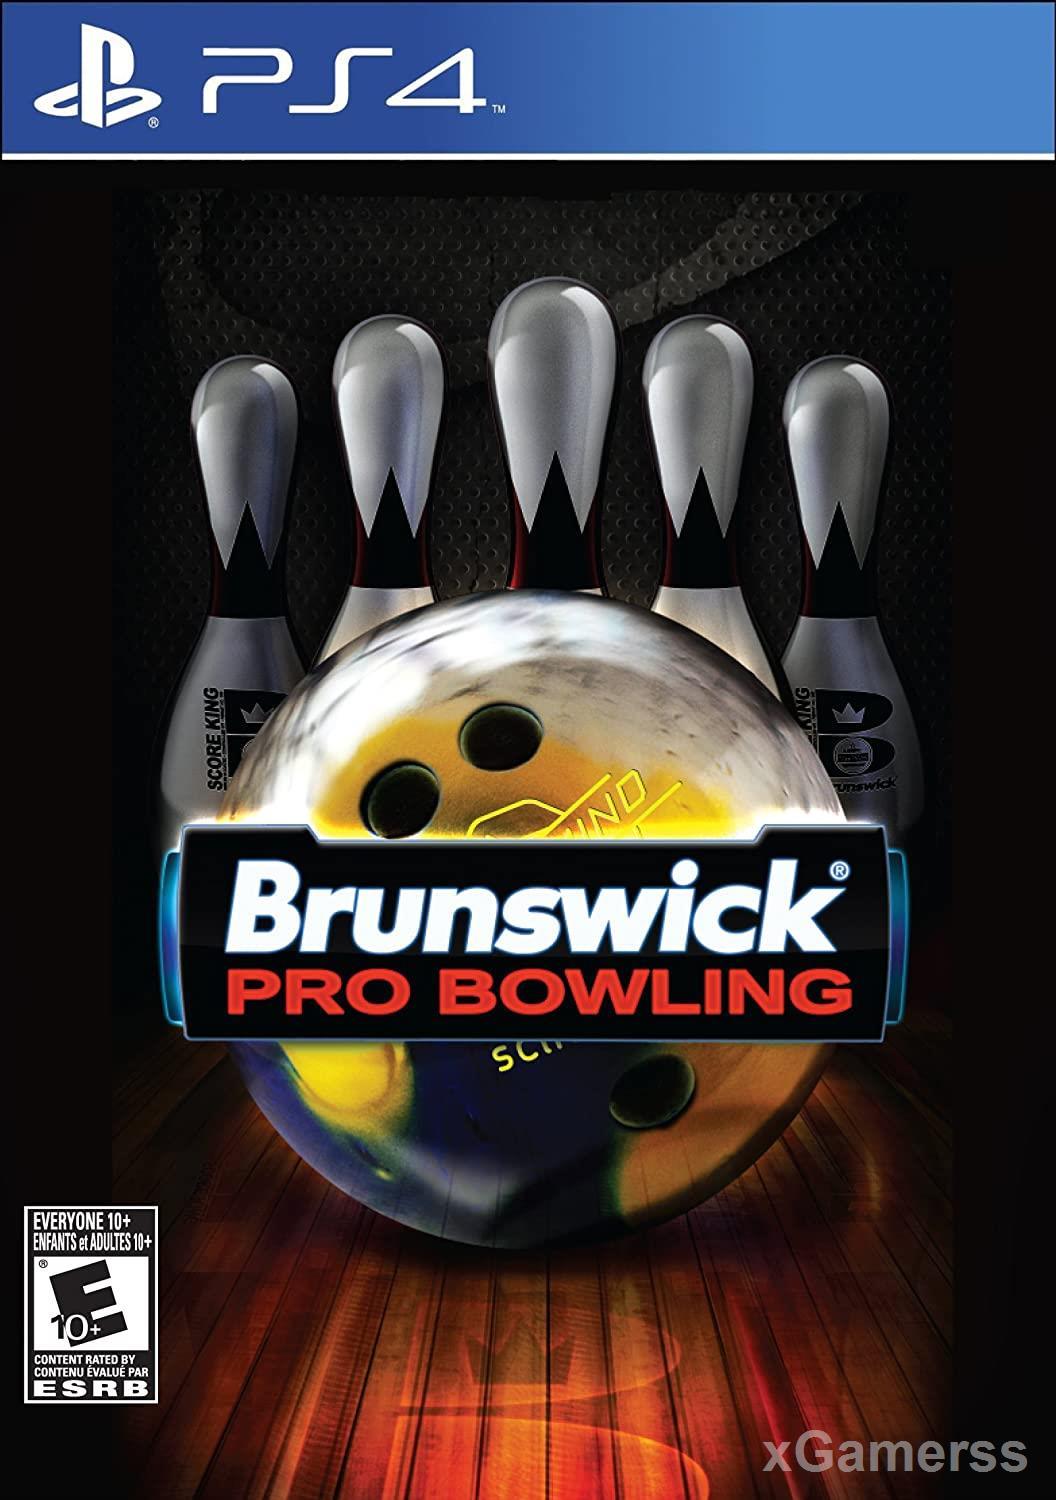 PBA Pro Bowling - game created of the Professional Bowlers Association